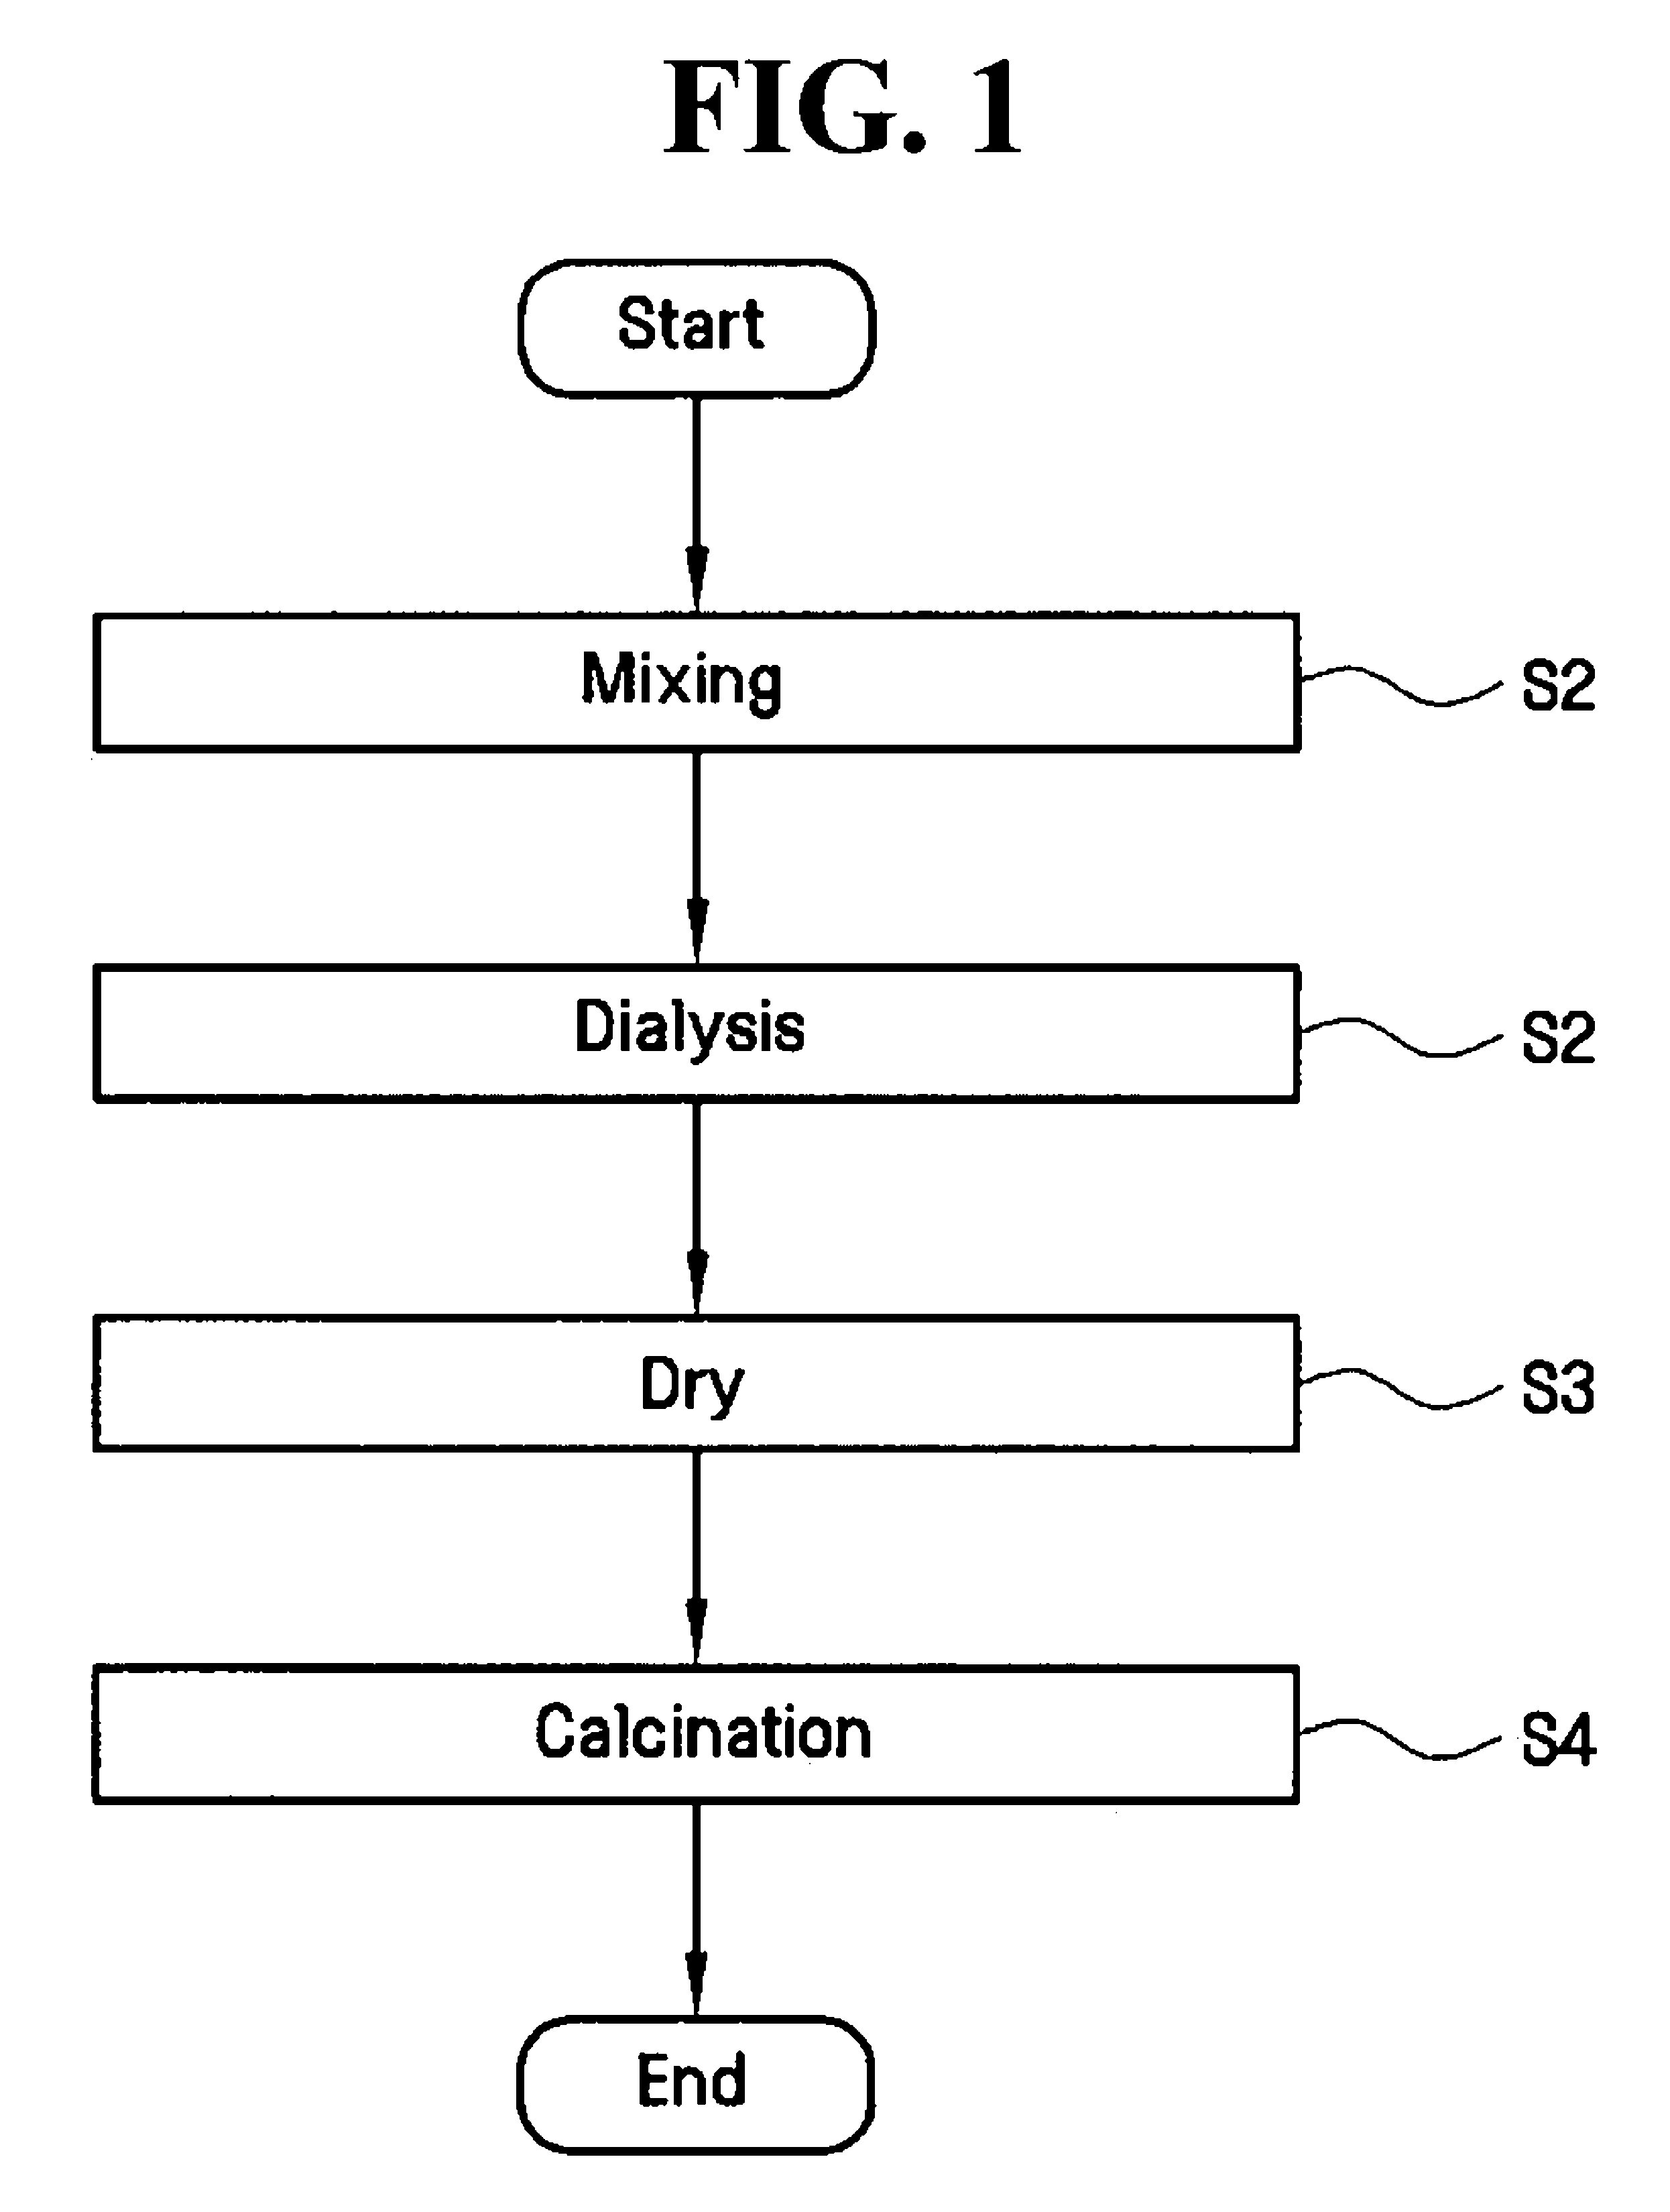 Photocatalyst materials having semiconductor characteristics and methods for manufacturing and using the same